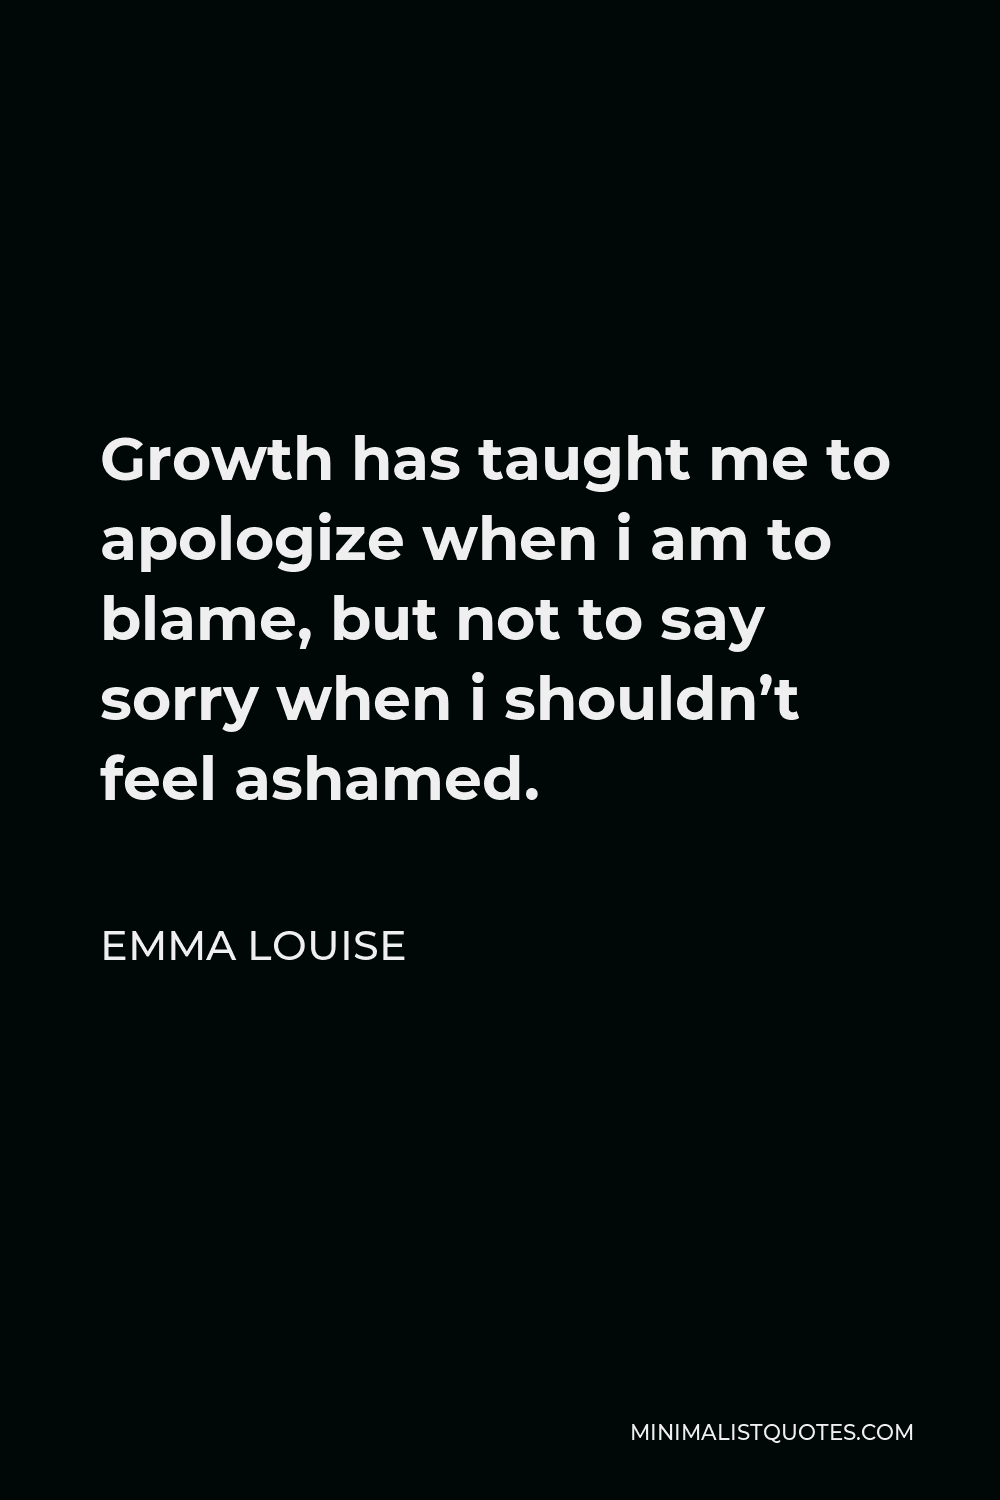 Emma Louise Quote - Growth has taught me to apologize when i am to blame, but not to say sorry when i shouldn’t feel ashamed.